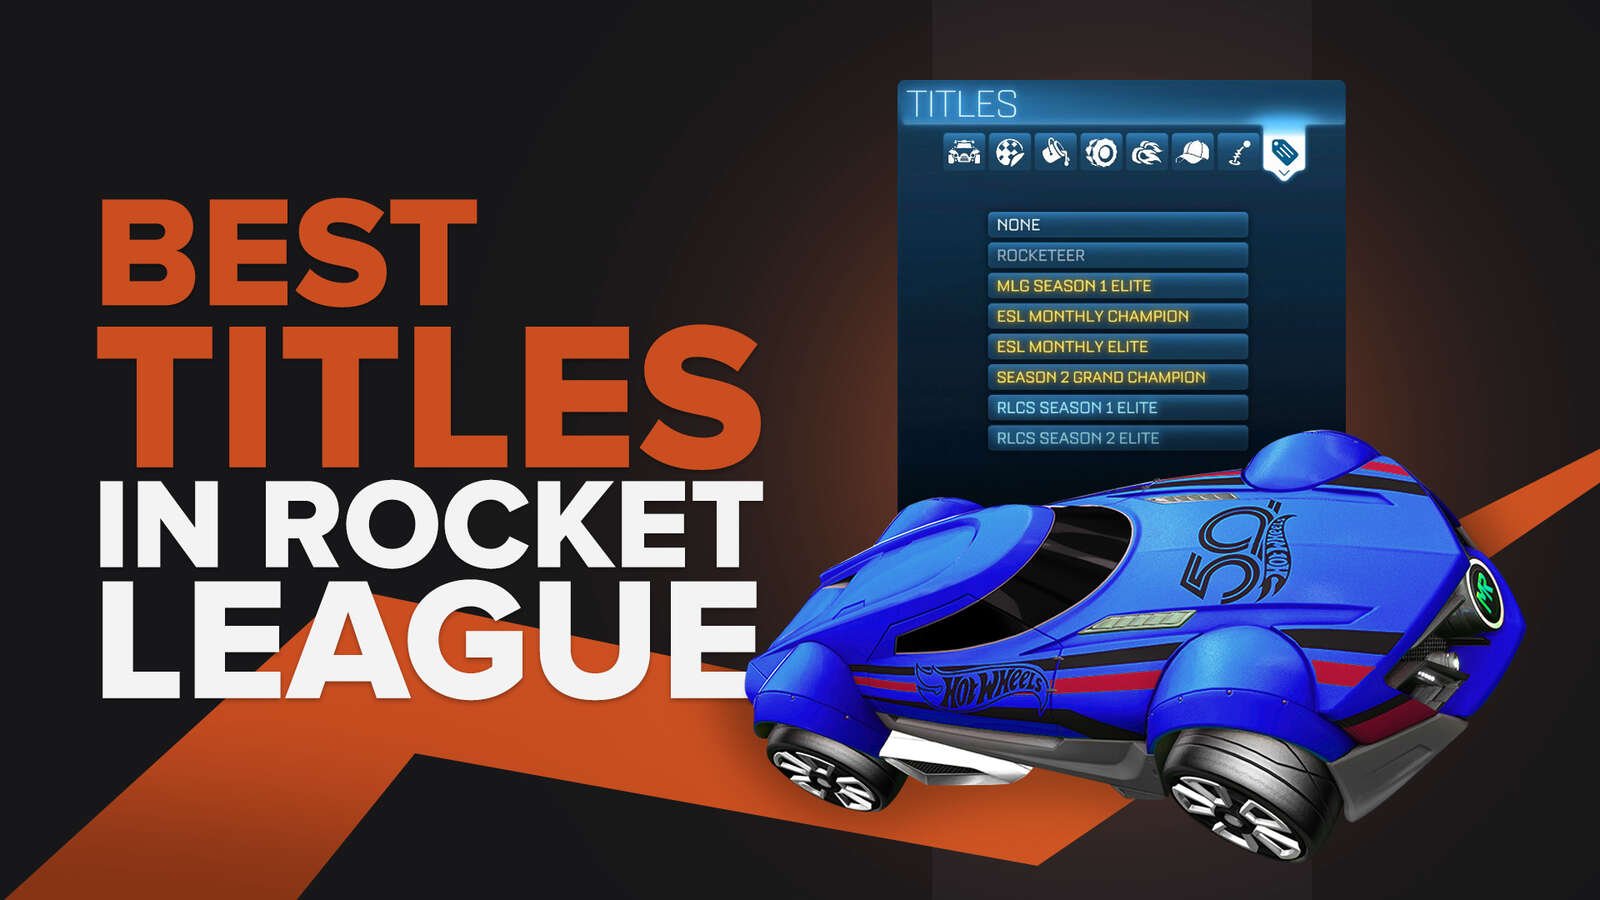 The Best Titles You Didn’t Know Existed In Rocket League